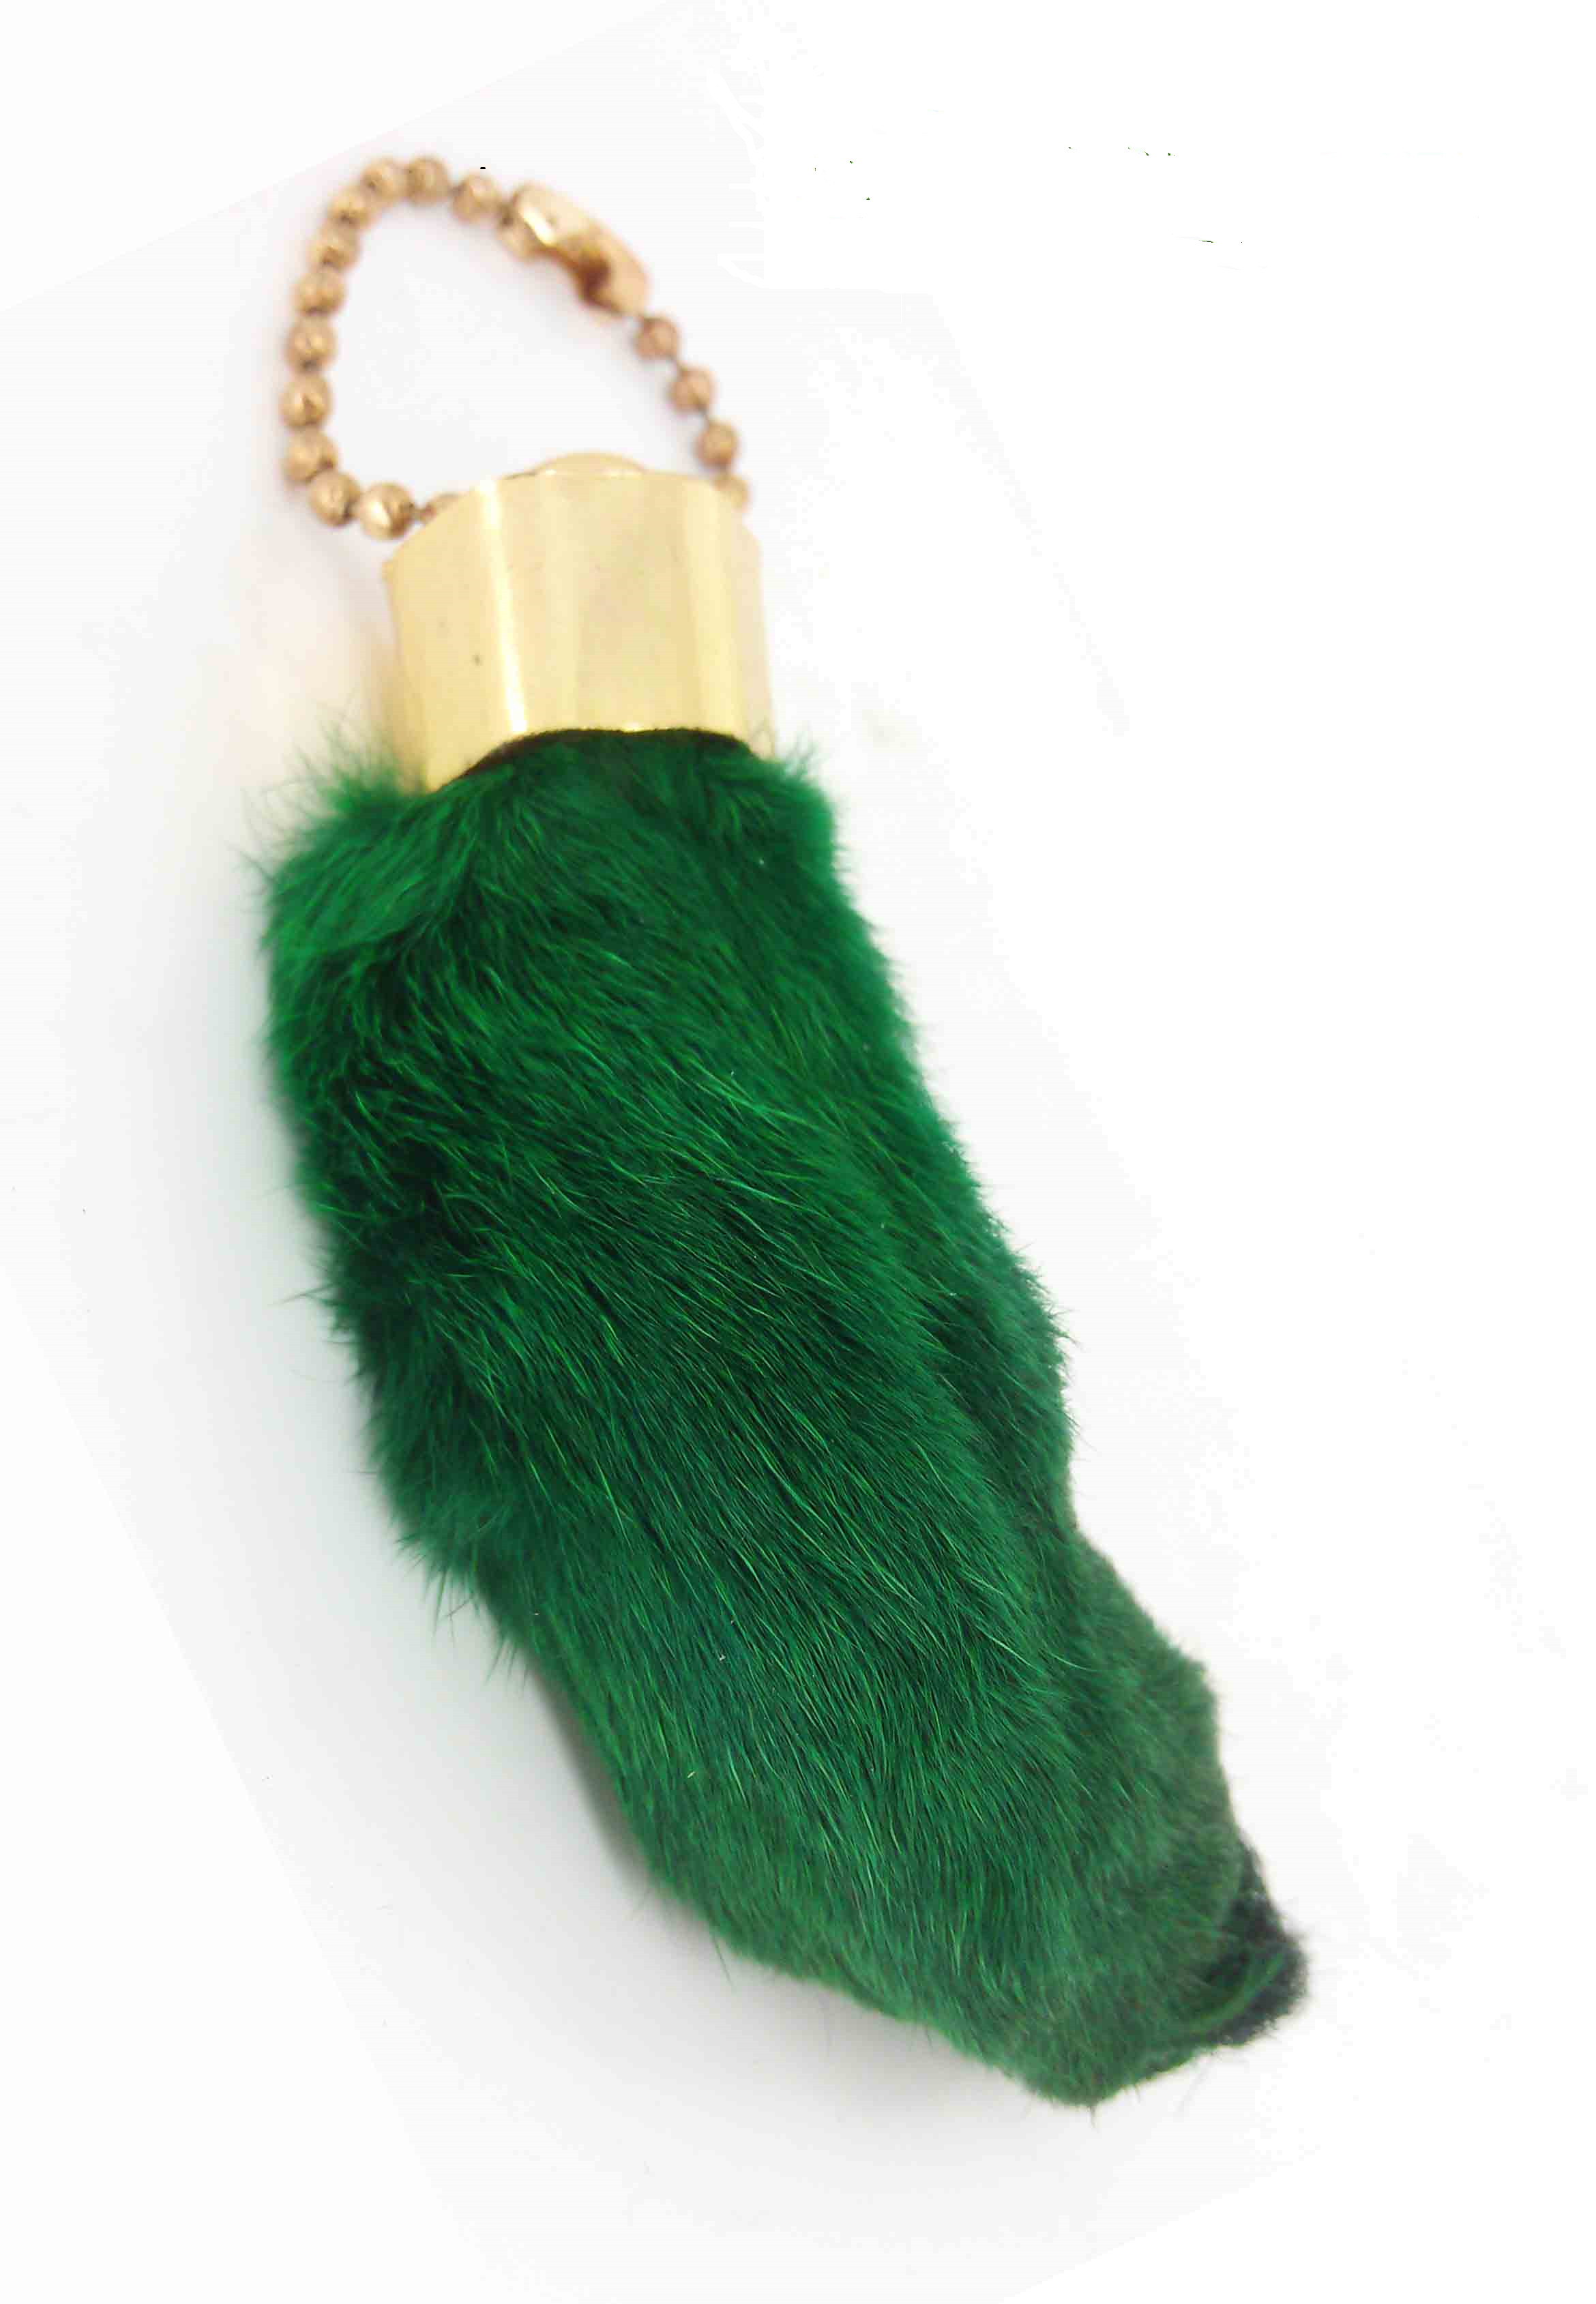 Rabbits foot. Charms Green Юба. Rabbits foot for luck. Rabbit's foot Meadery. Rabbit foot Stars.